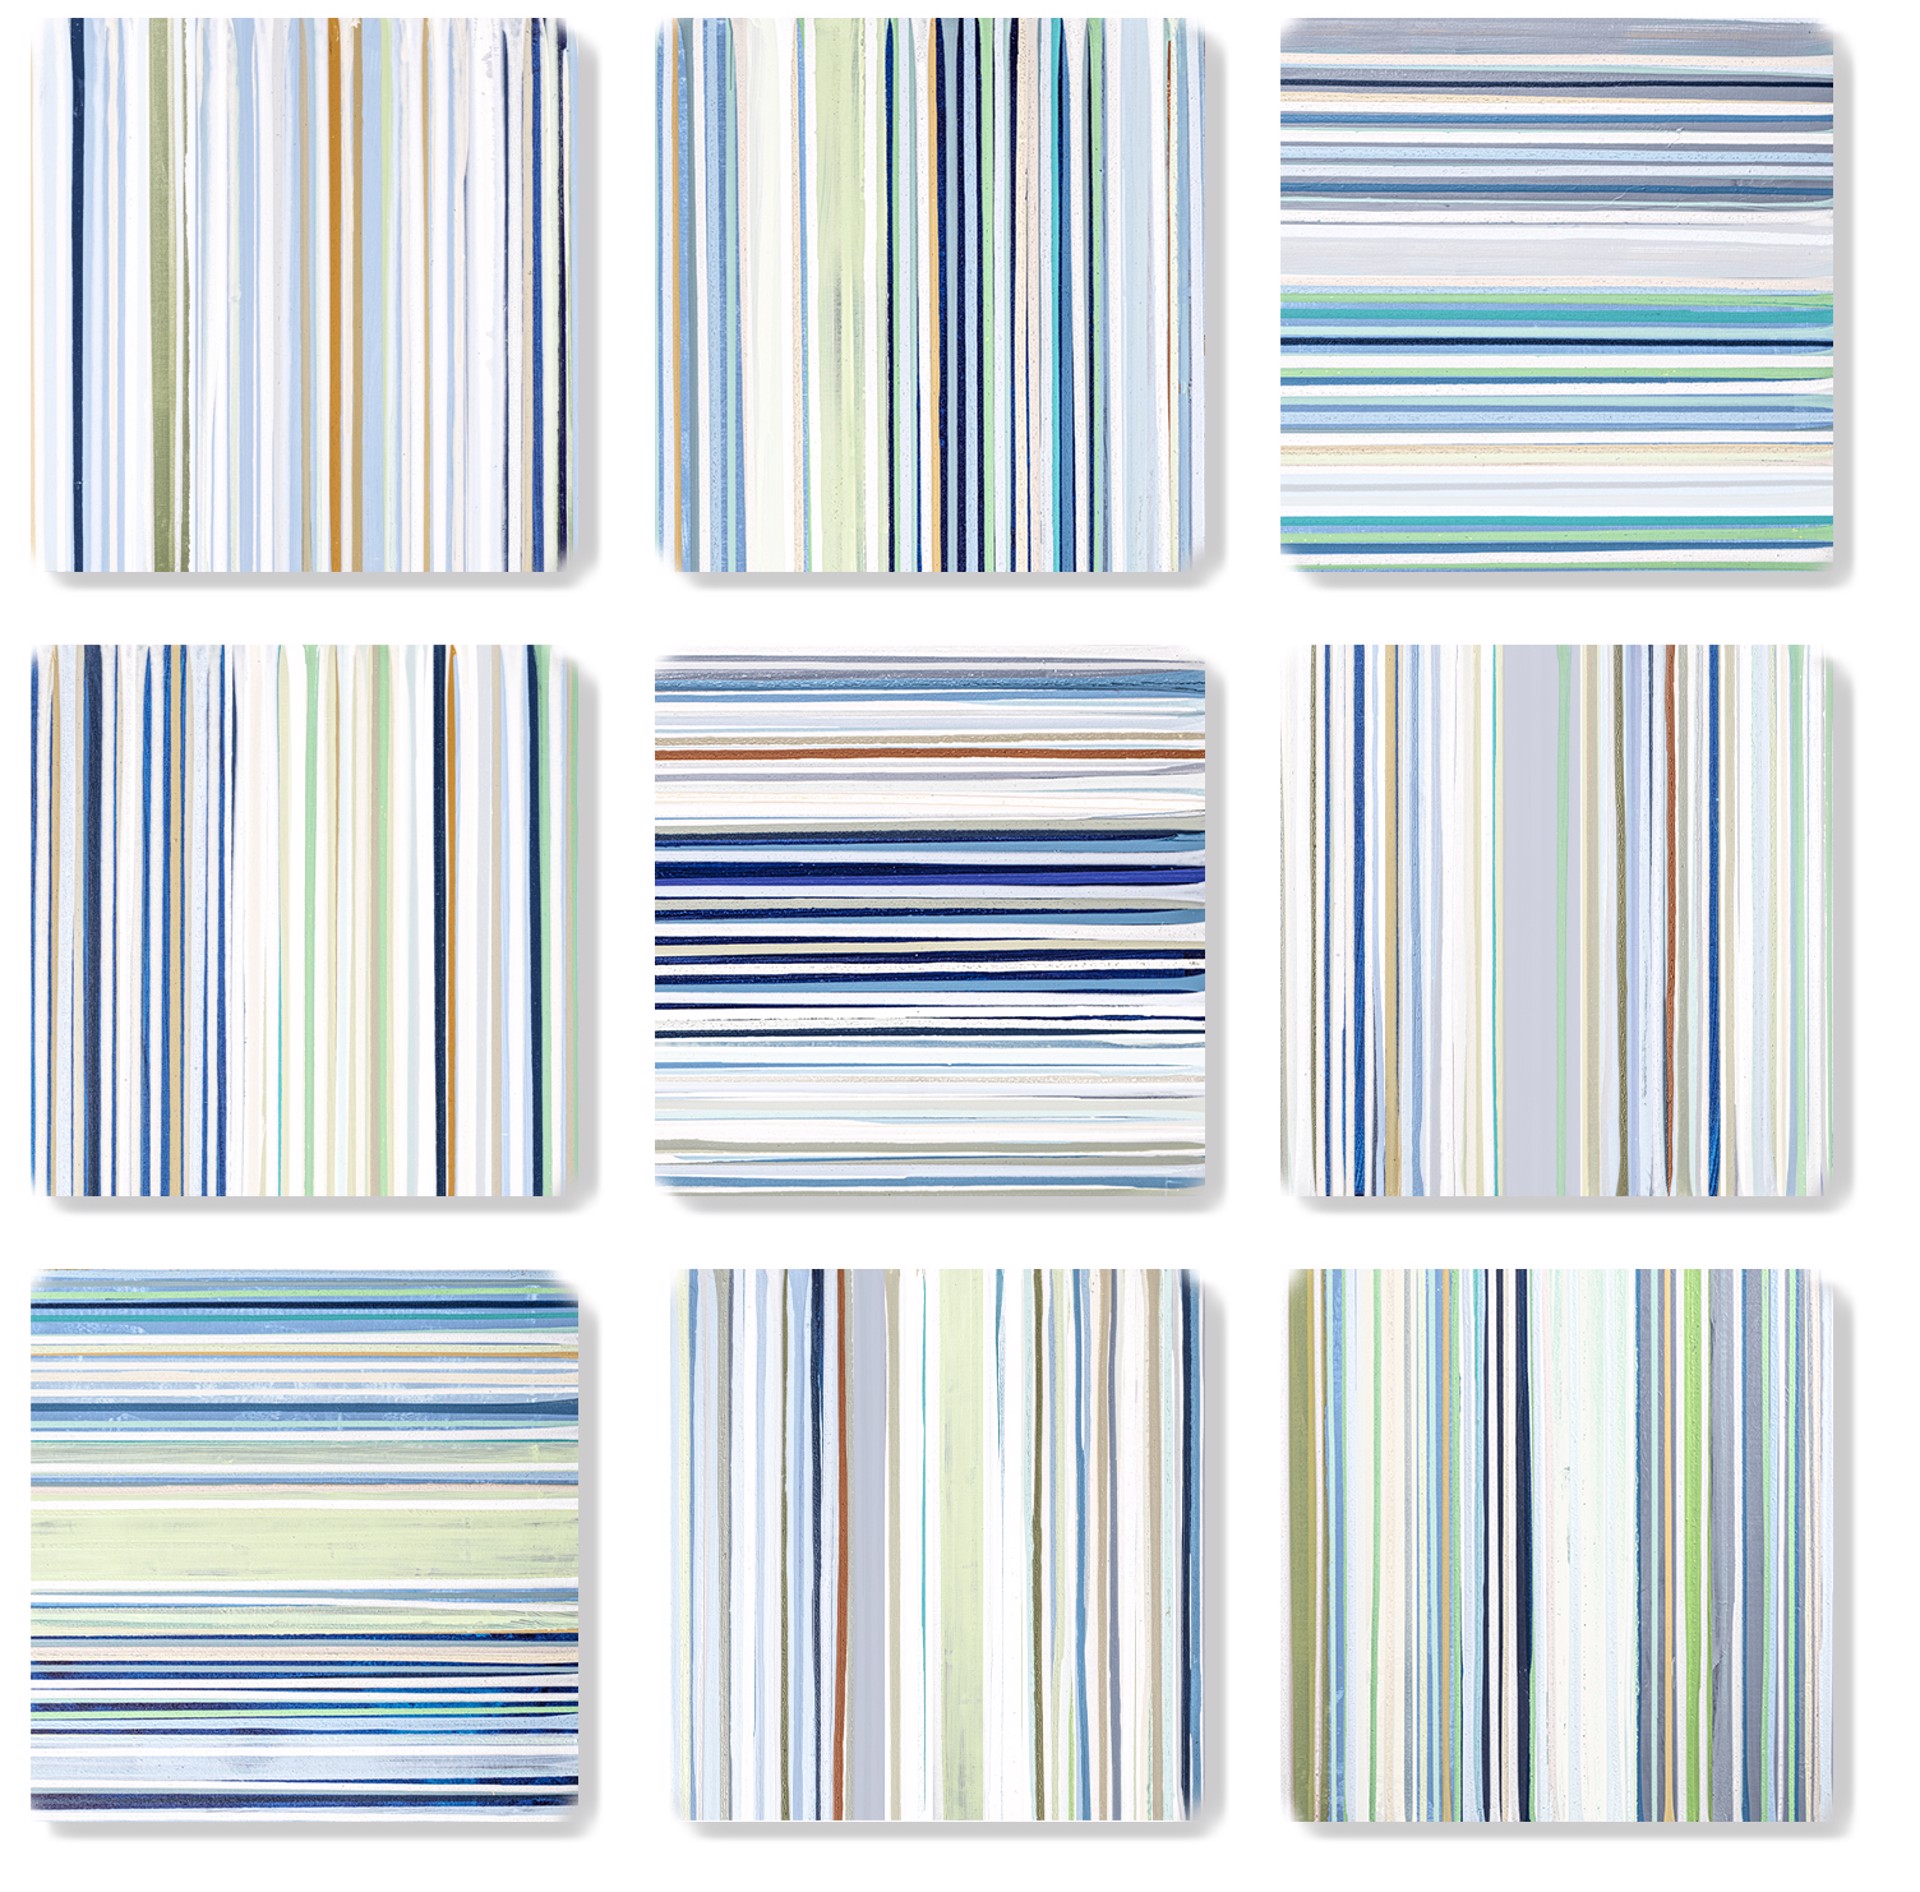 9 Acrylic panels by John Schuyler featuring colorful abstract lines